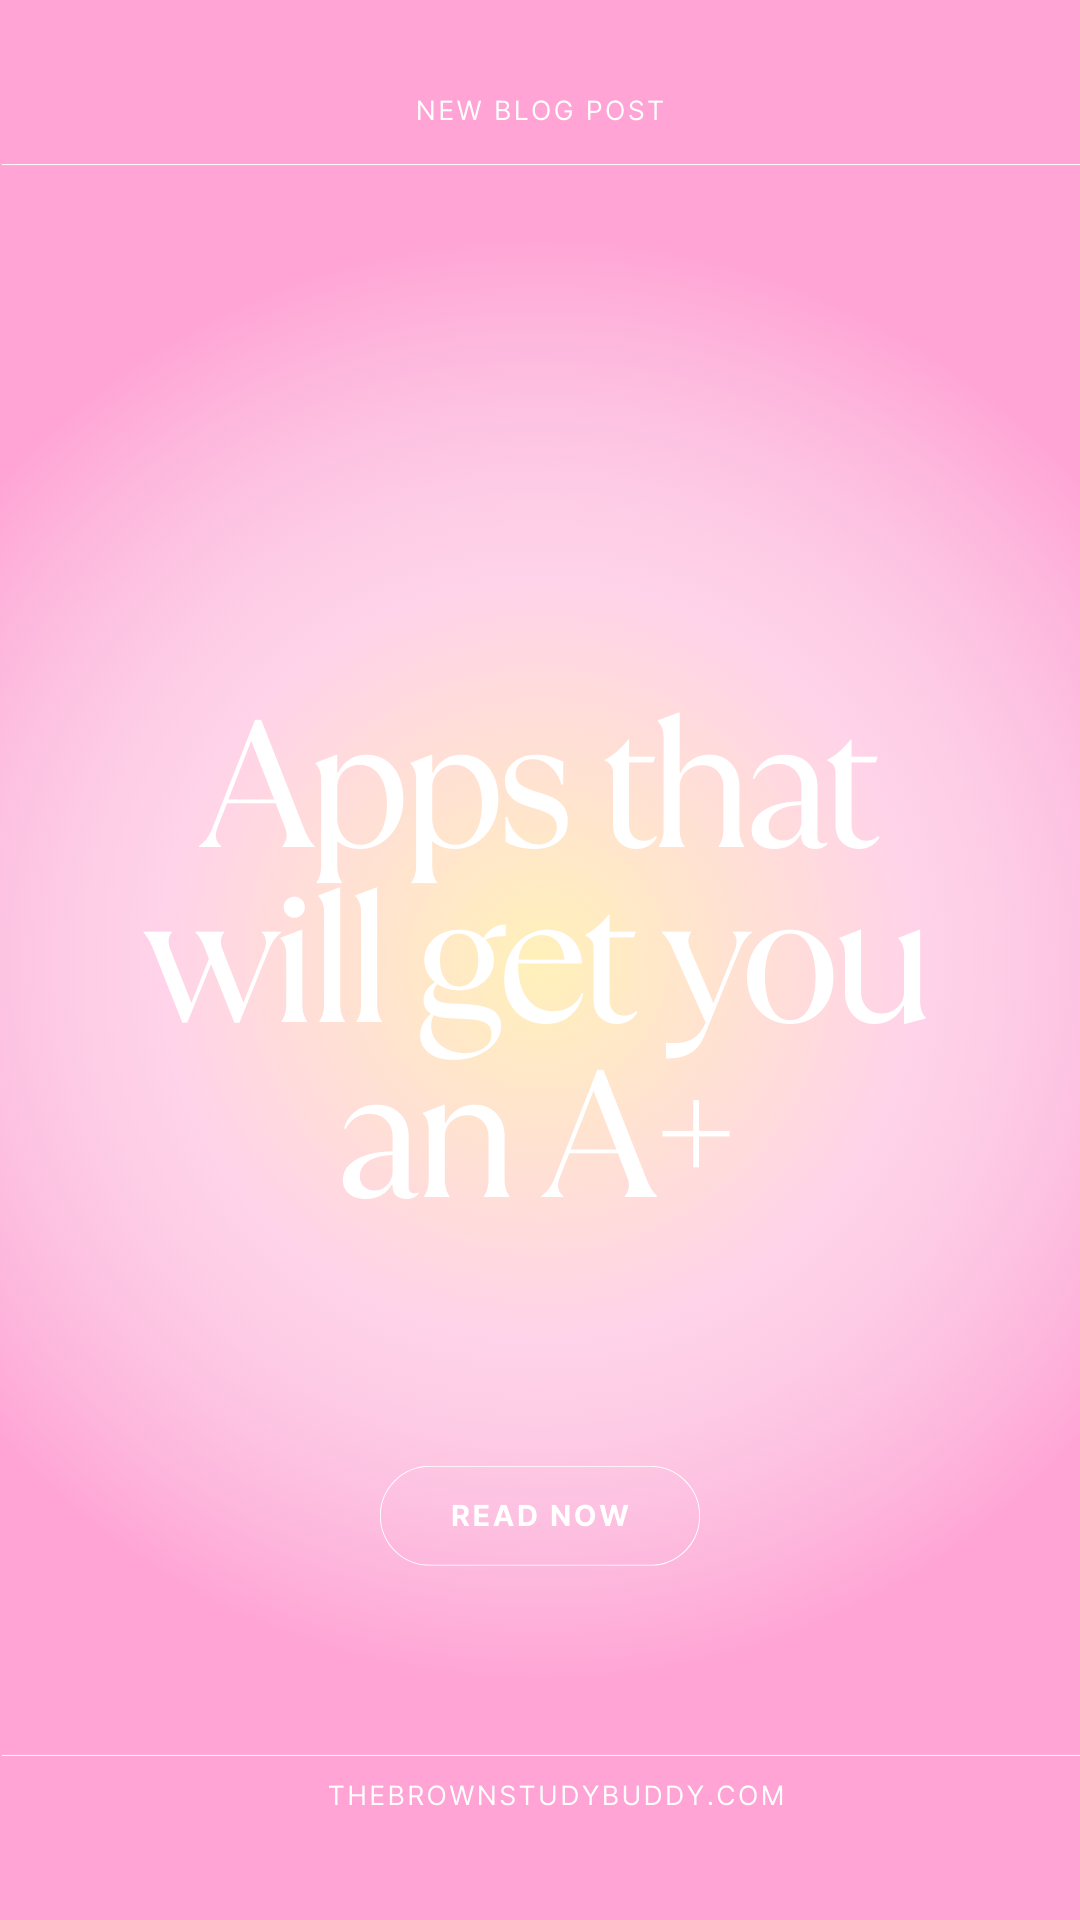 apps that will get you an A+